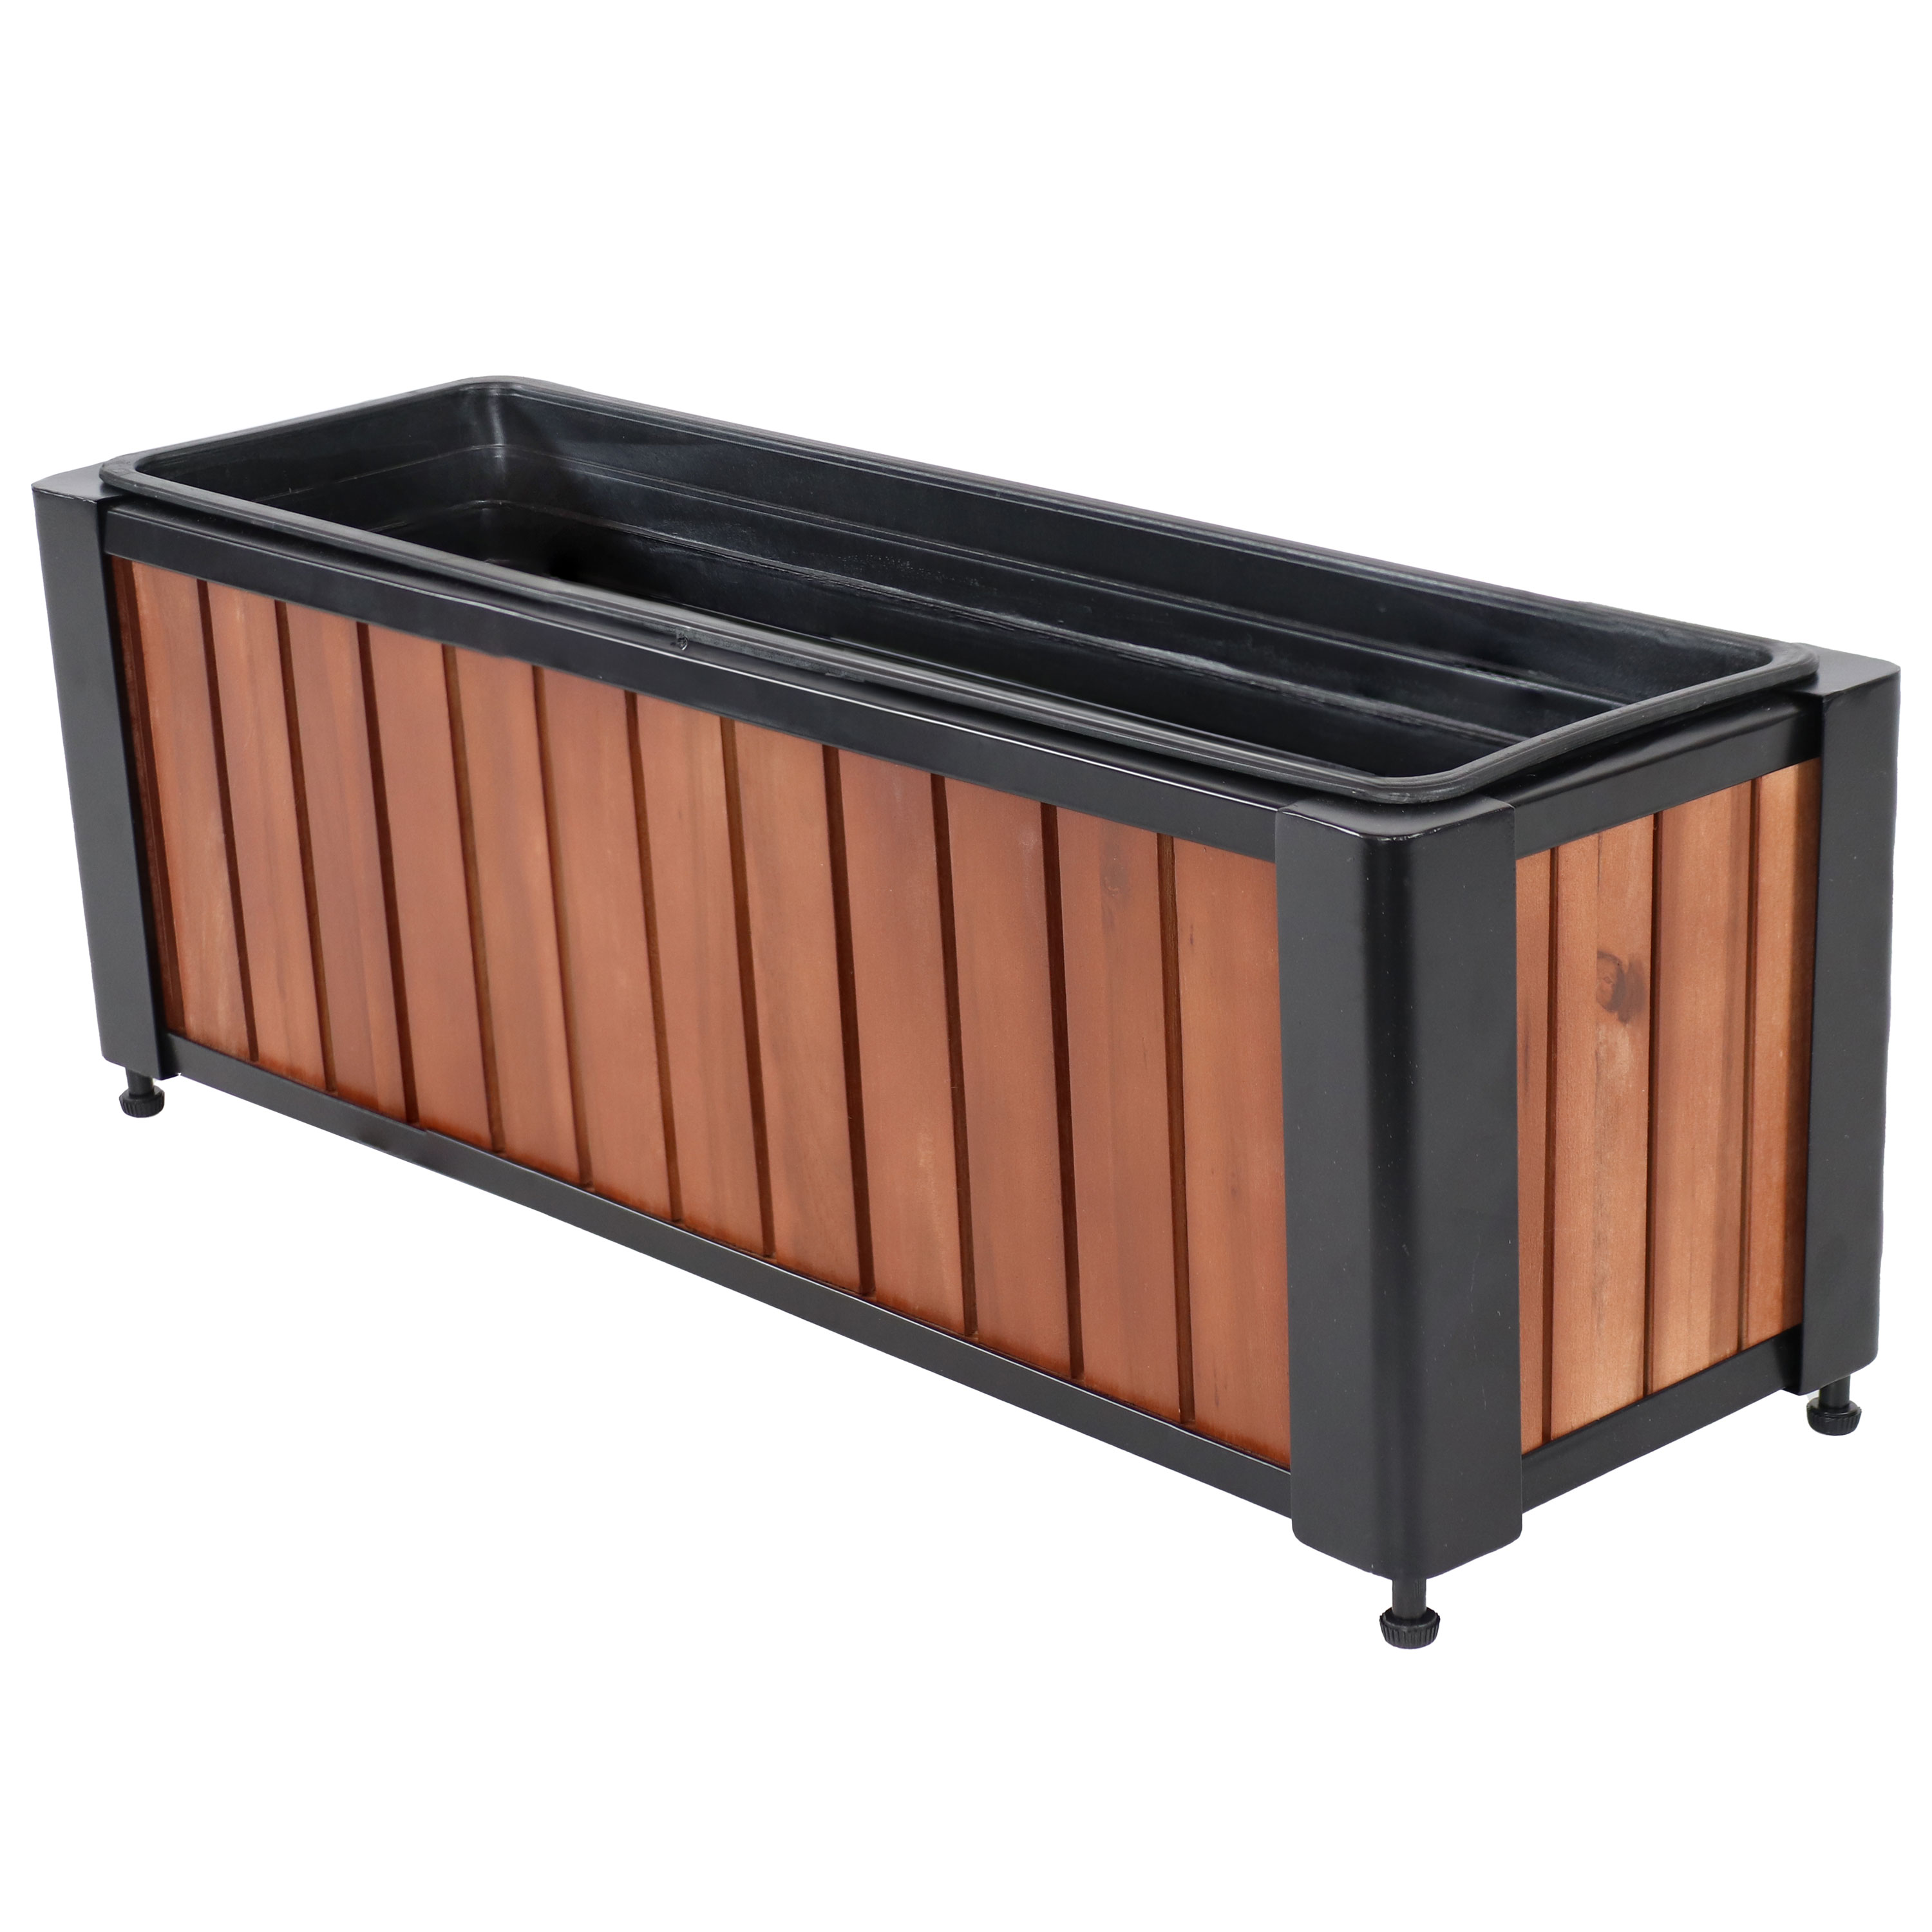 Acacia Wood Slatted Planter Box with Removable Insert